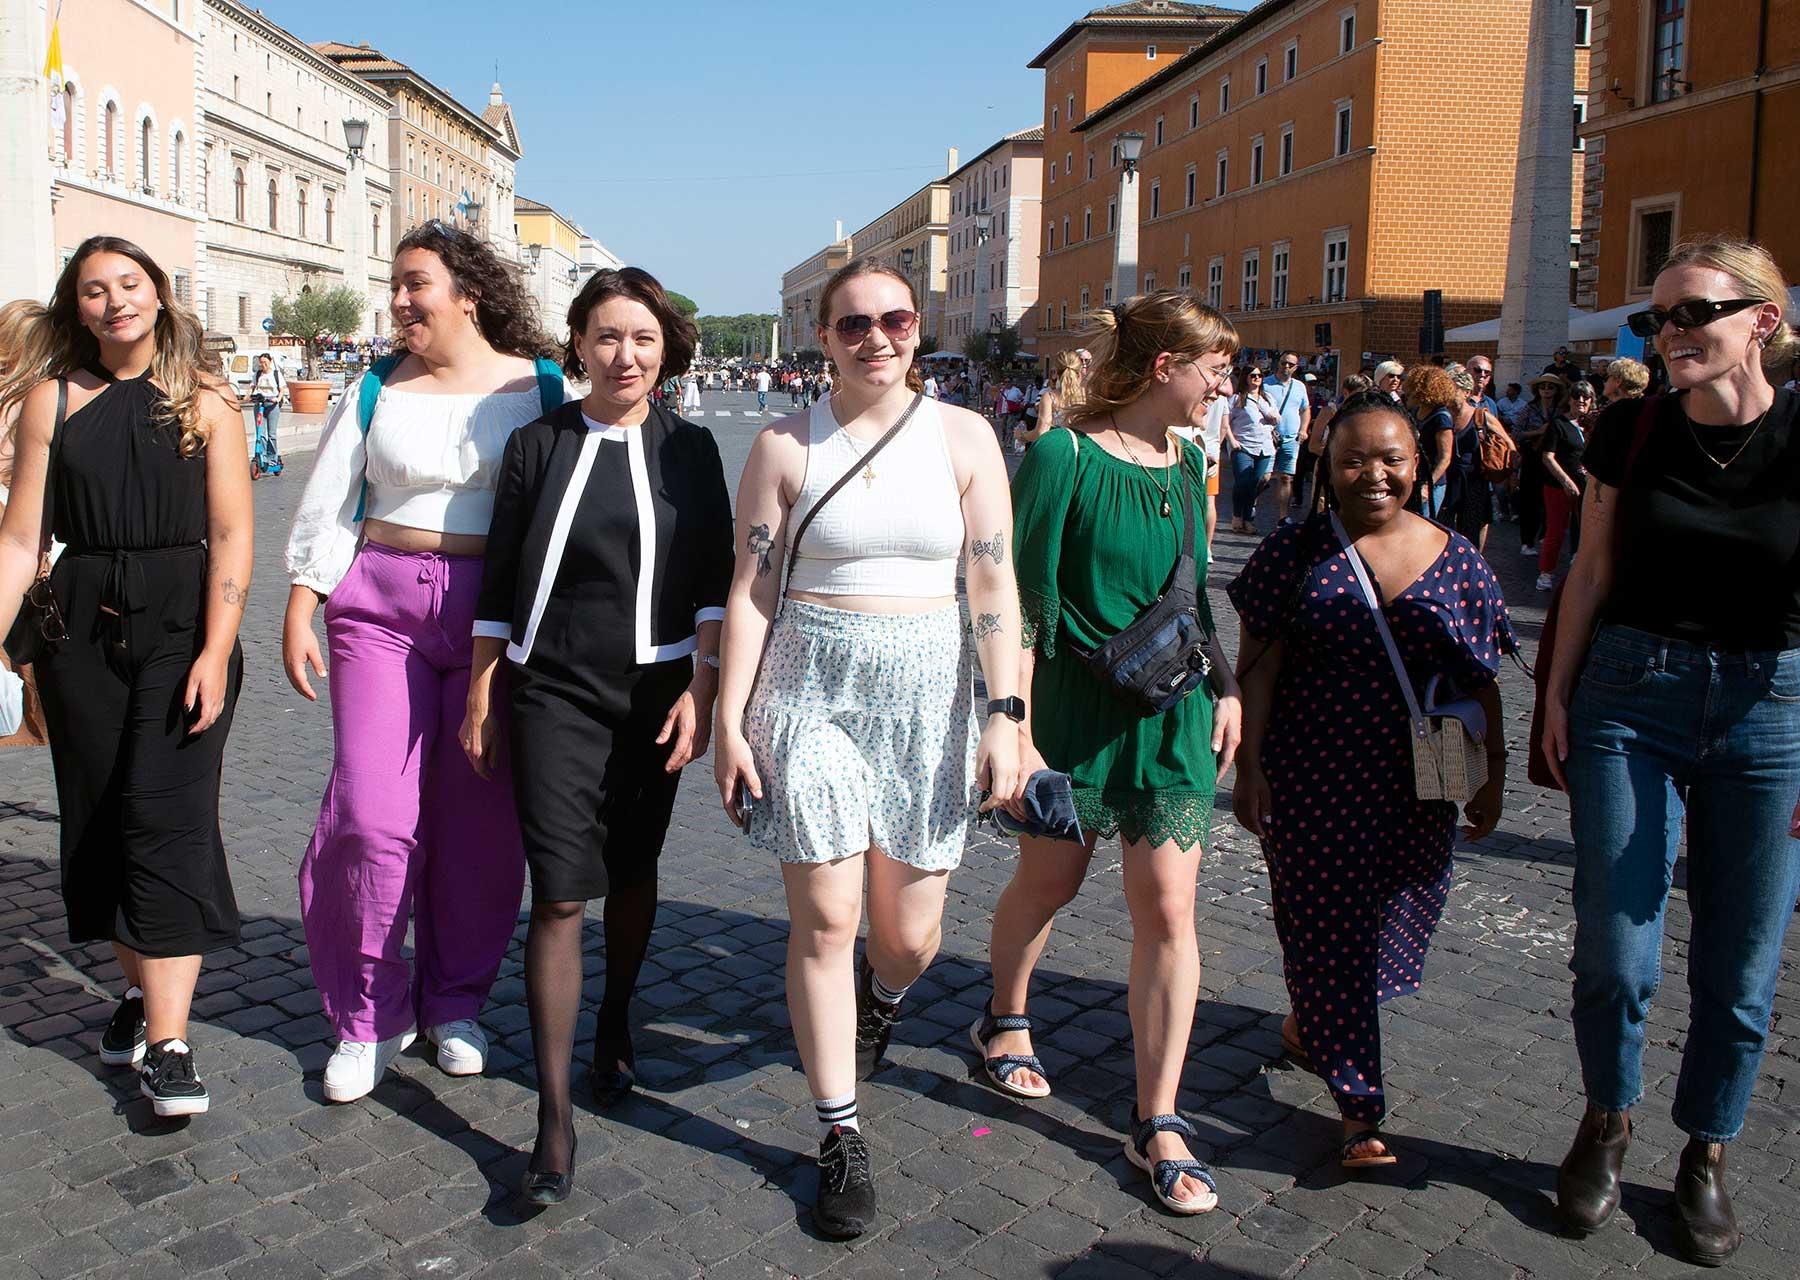 General Secretary Anne Burghardt with LWF Youth delegation walking to St Peter’s Square. Photo: CatholicPressPhoto/Alessia Giuliani